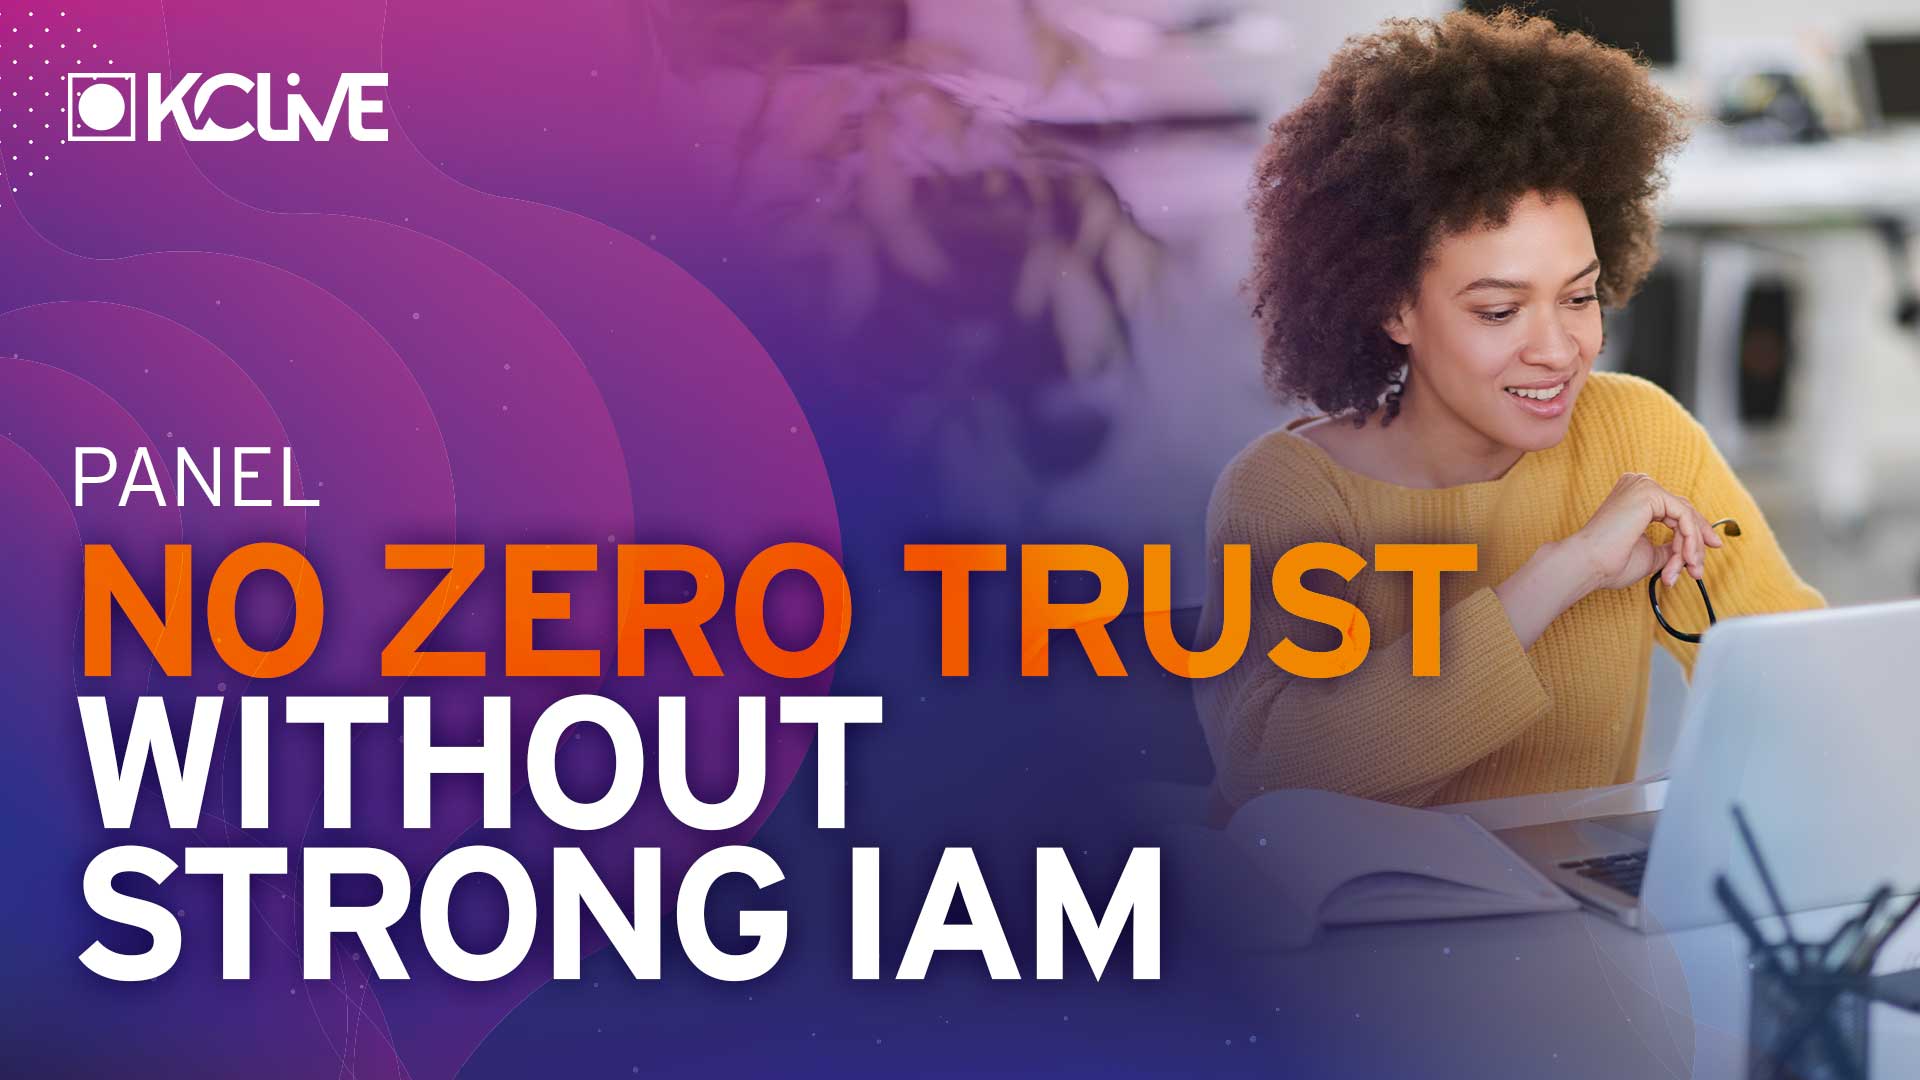 Panel: No Zero Trust Without Strong IAM - What You Need in IGA and Beyond for Enabling Zero Trust